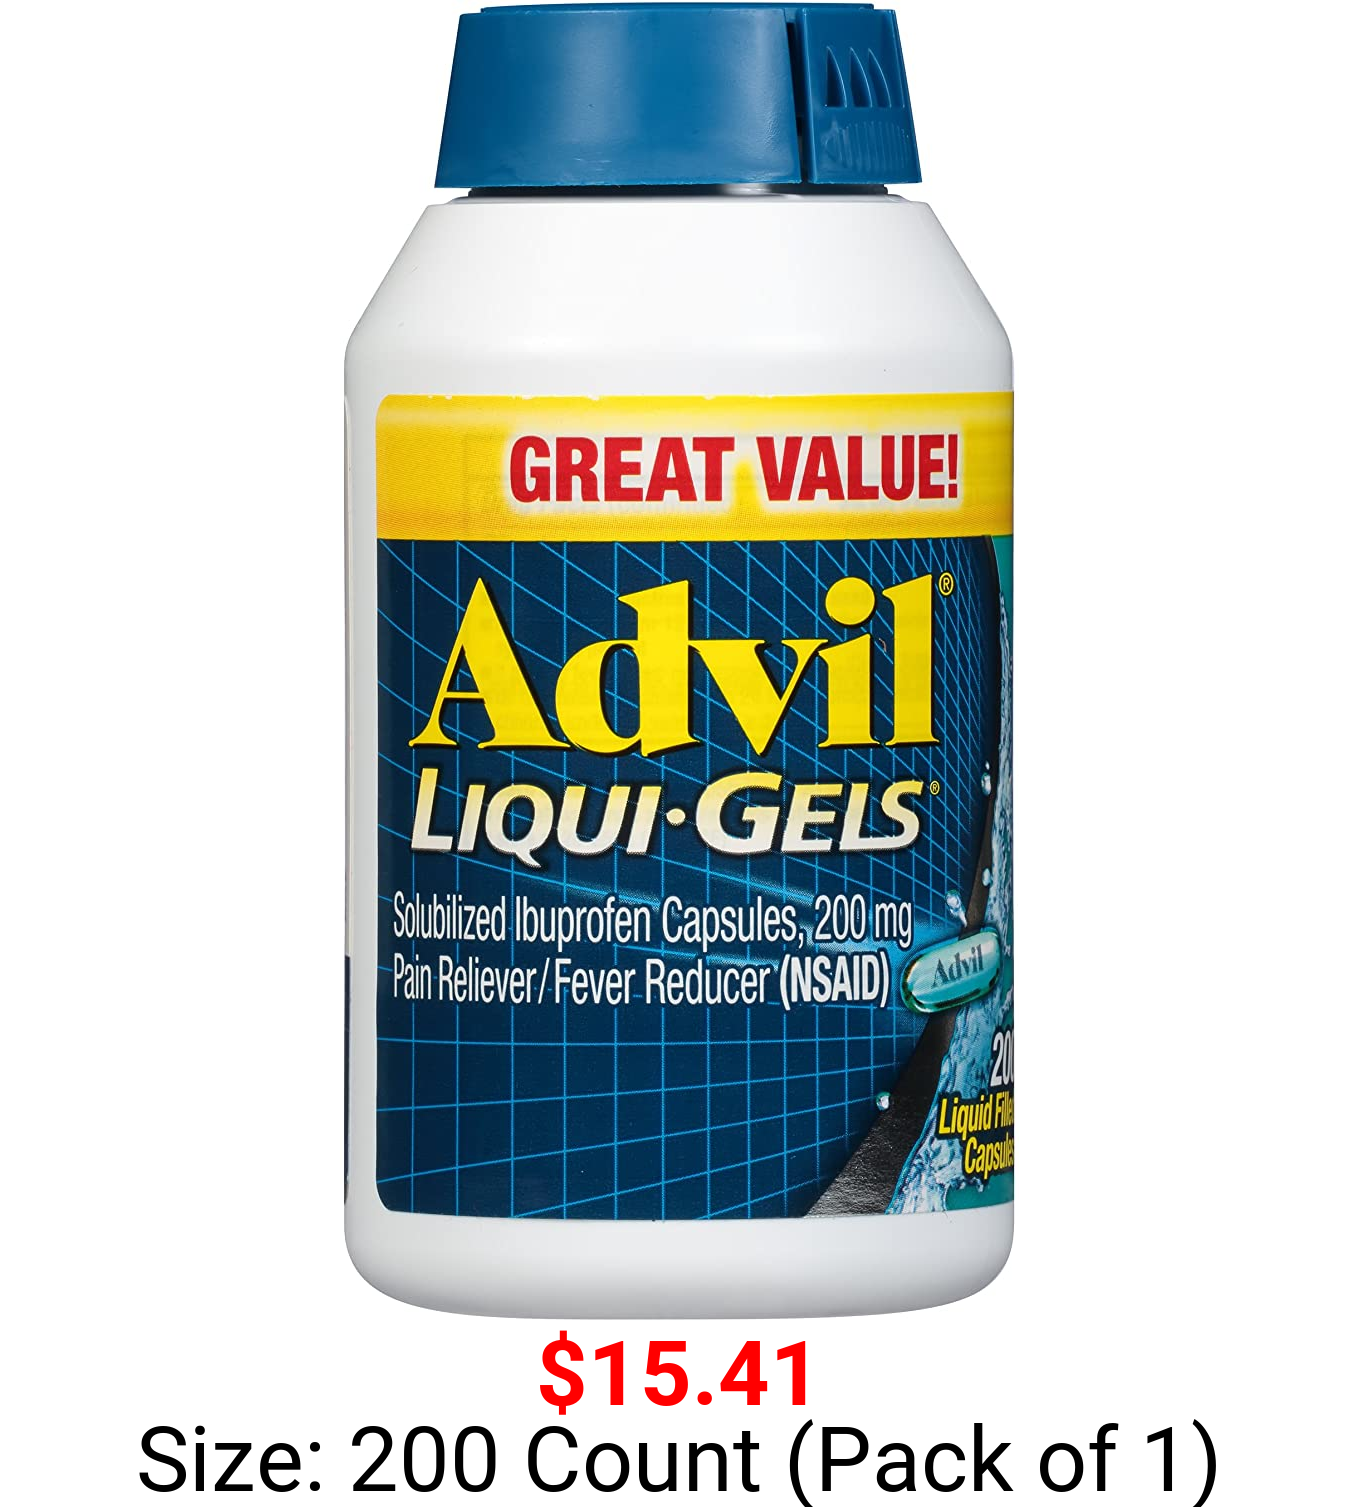 Advil Liqui-Gels Pain Reliever and Fever Reducer, Pain Medicine for Adults with Ibuprofen 200mg for Headache, Backache, Menstrual Pain and Joint Pain Relief - 200 Liquid Filled Capsules